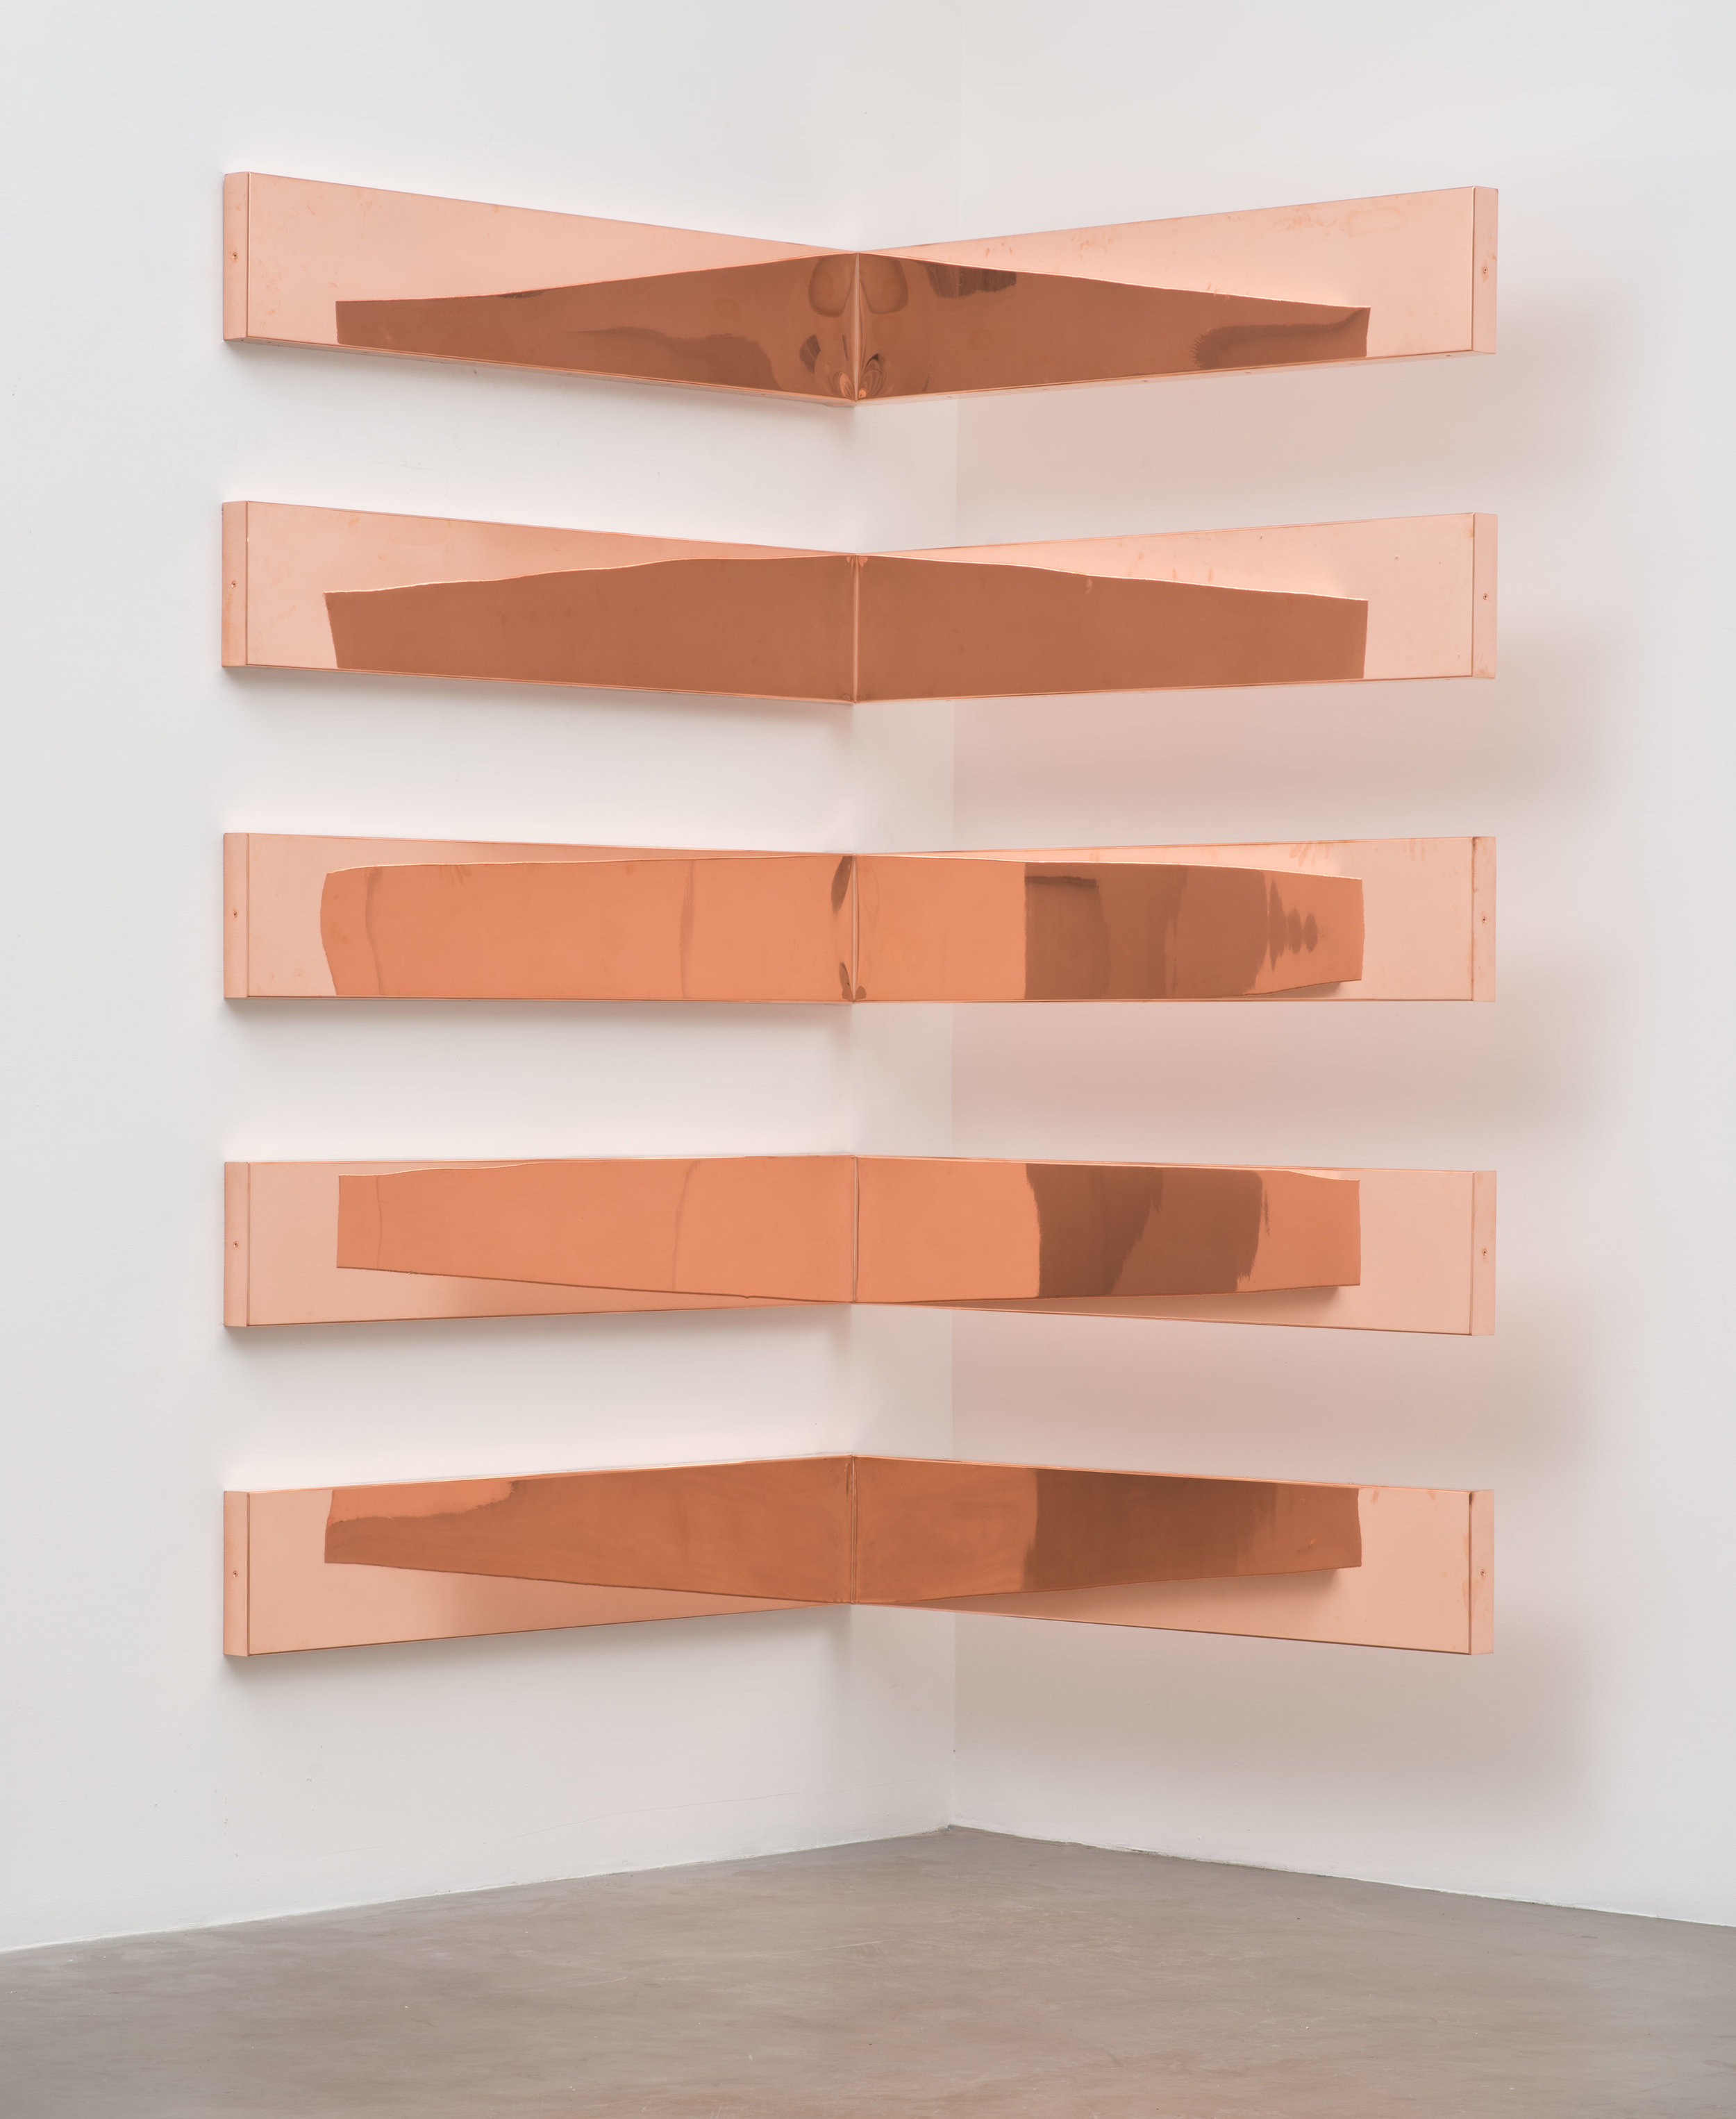   Copper Surrogates (60” x 120” 48 ounce C11000 Copper Alloy, 90º Bend, 60”&nbsp;Bisection/5 Sections: December 4/December 7, 2014, Miami Beach, Florida, February 10–12, 2015, Los Angeles, California)    2014–   Polished copper  11 x 60 x 60 inches e